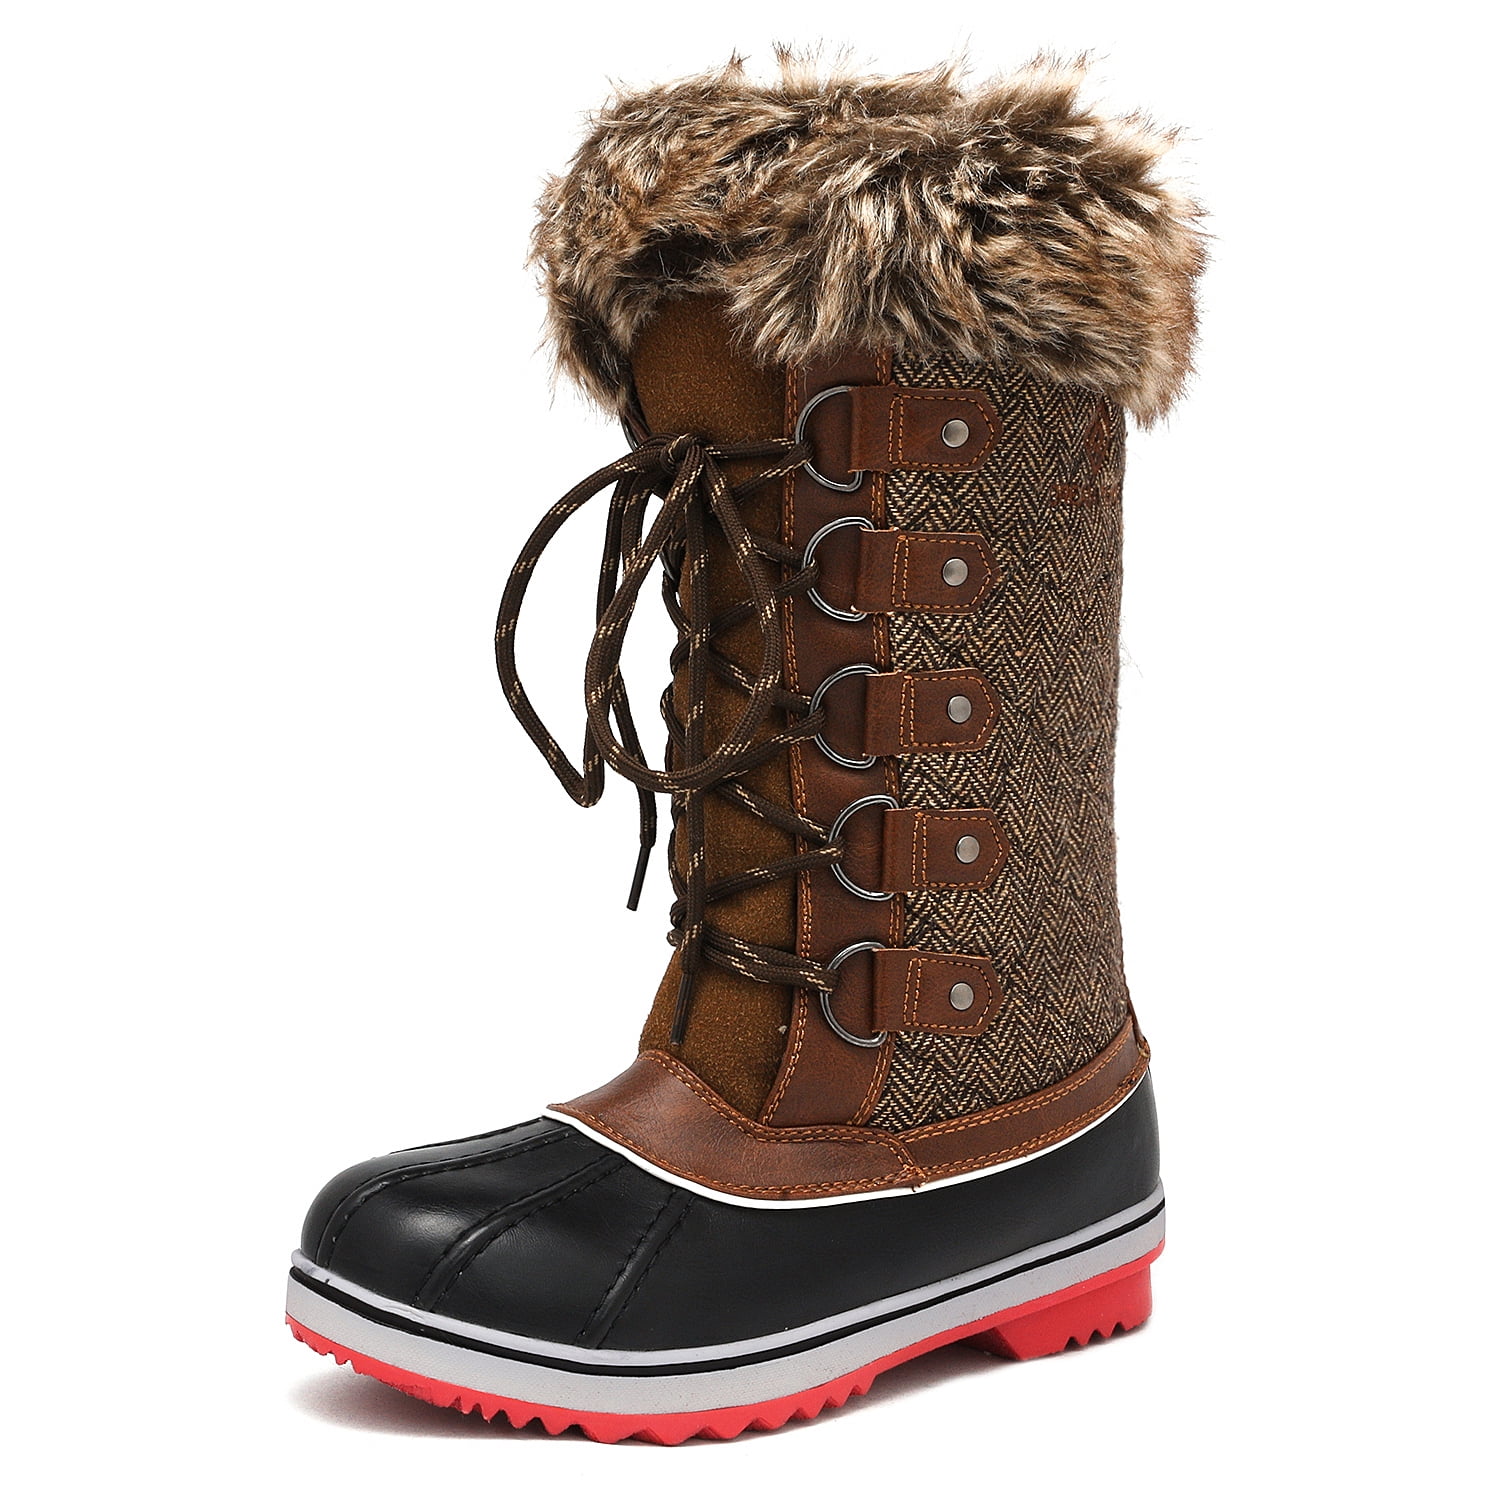 Buy > anna field winter boots > in stock